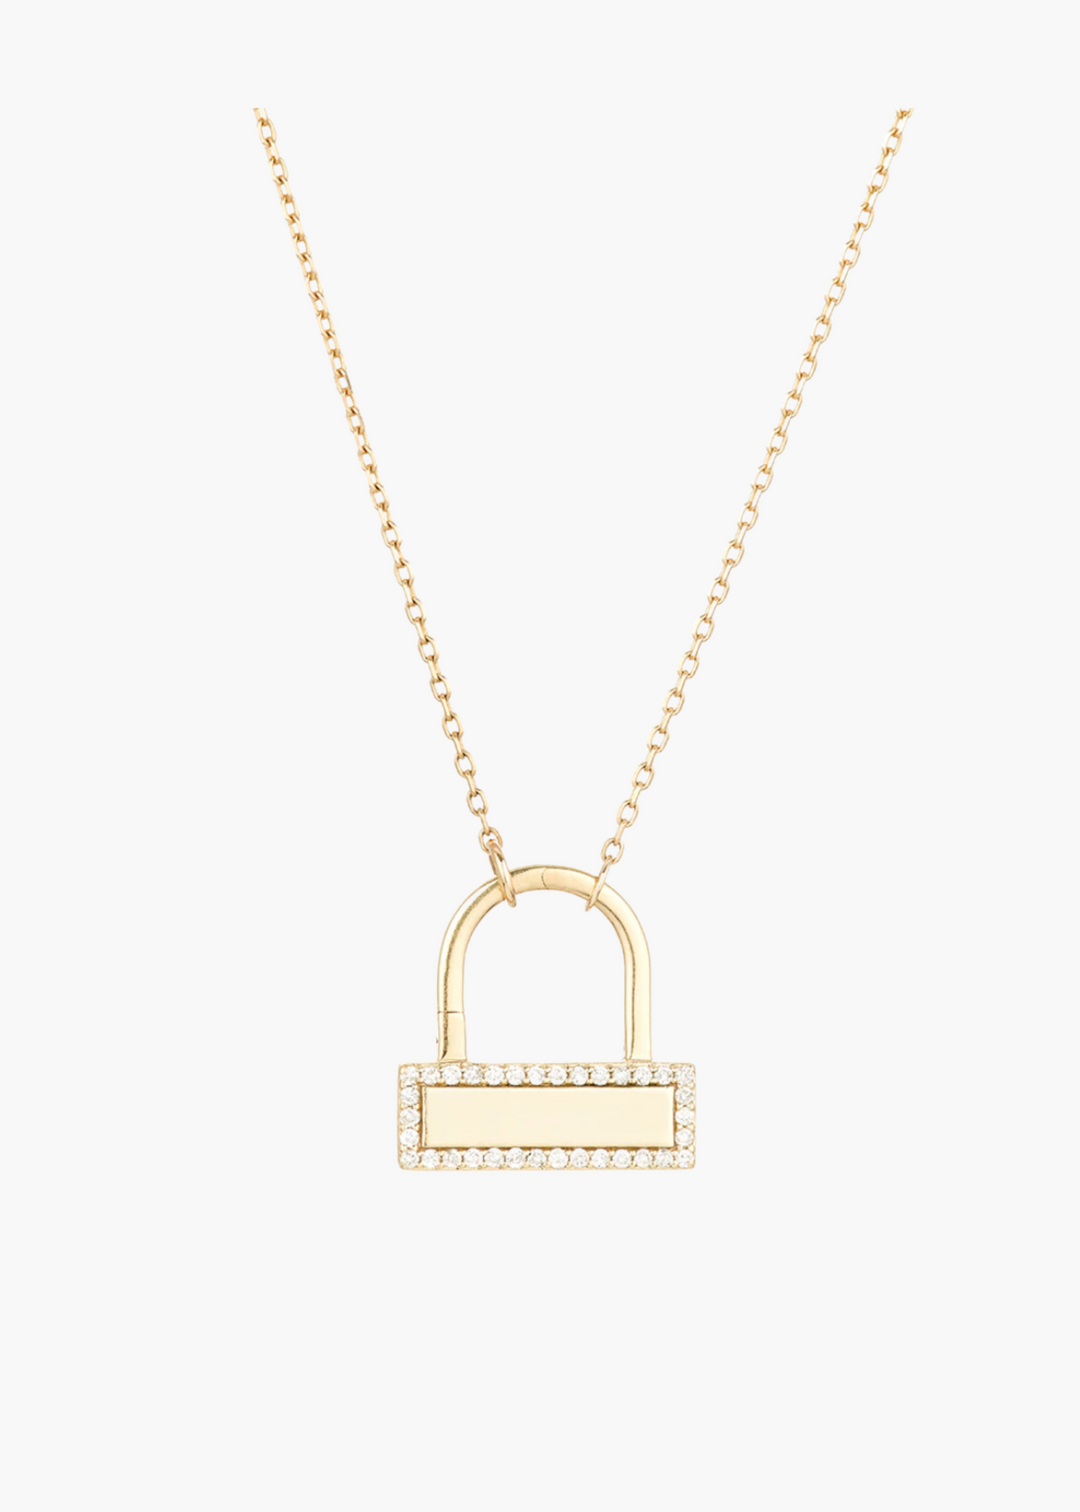 London Small Pave Lock Necklace